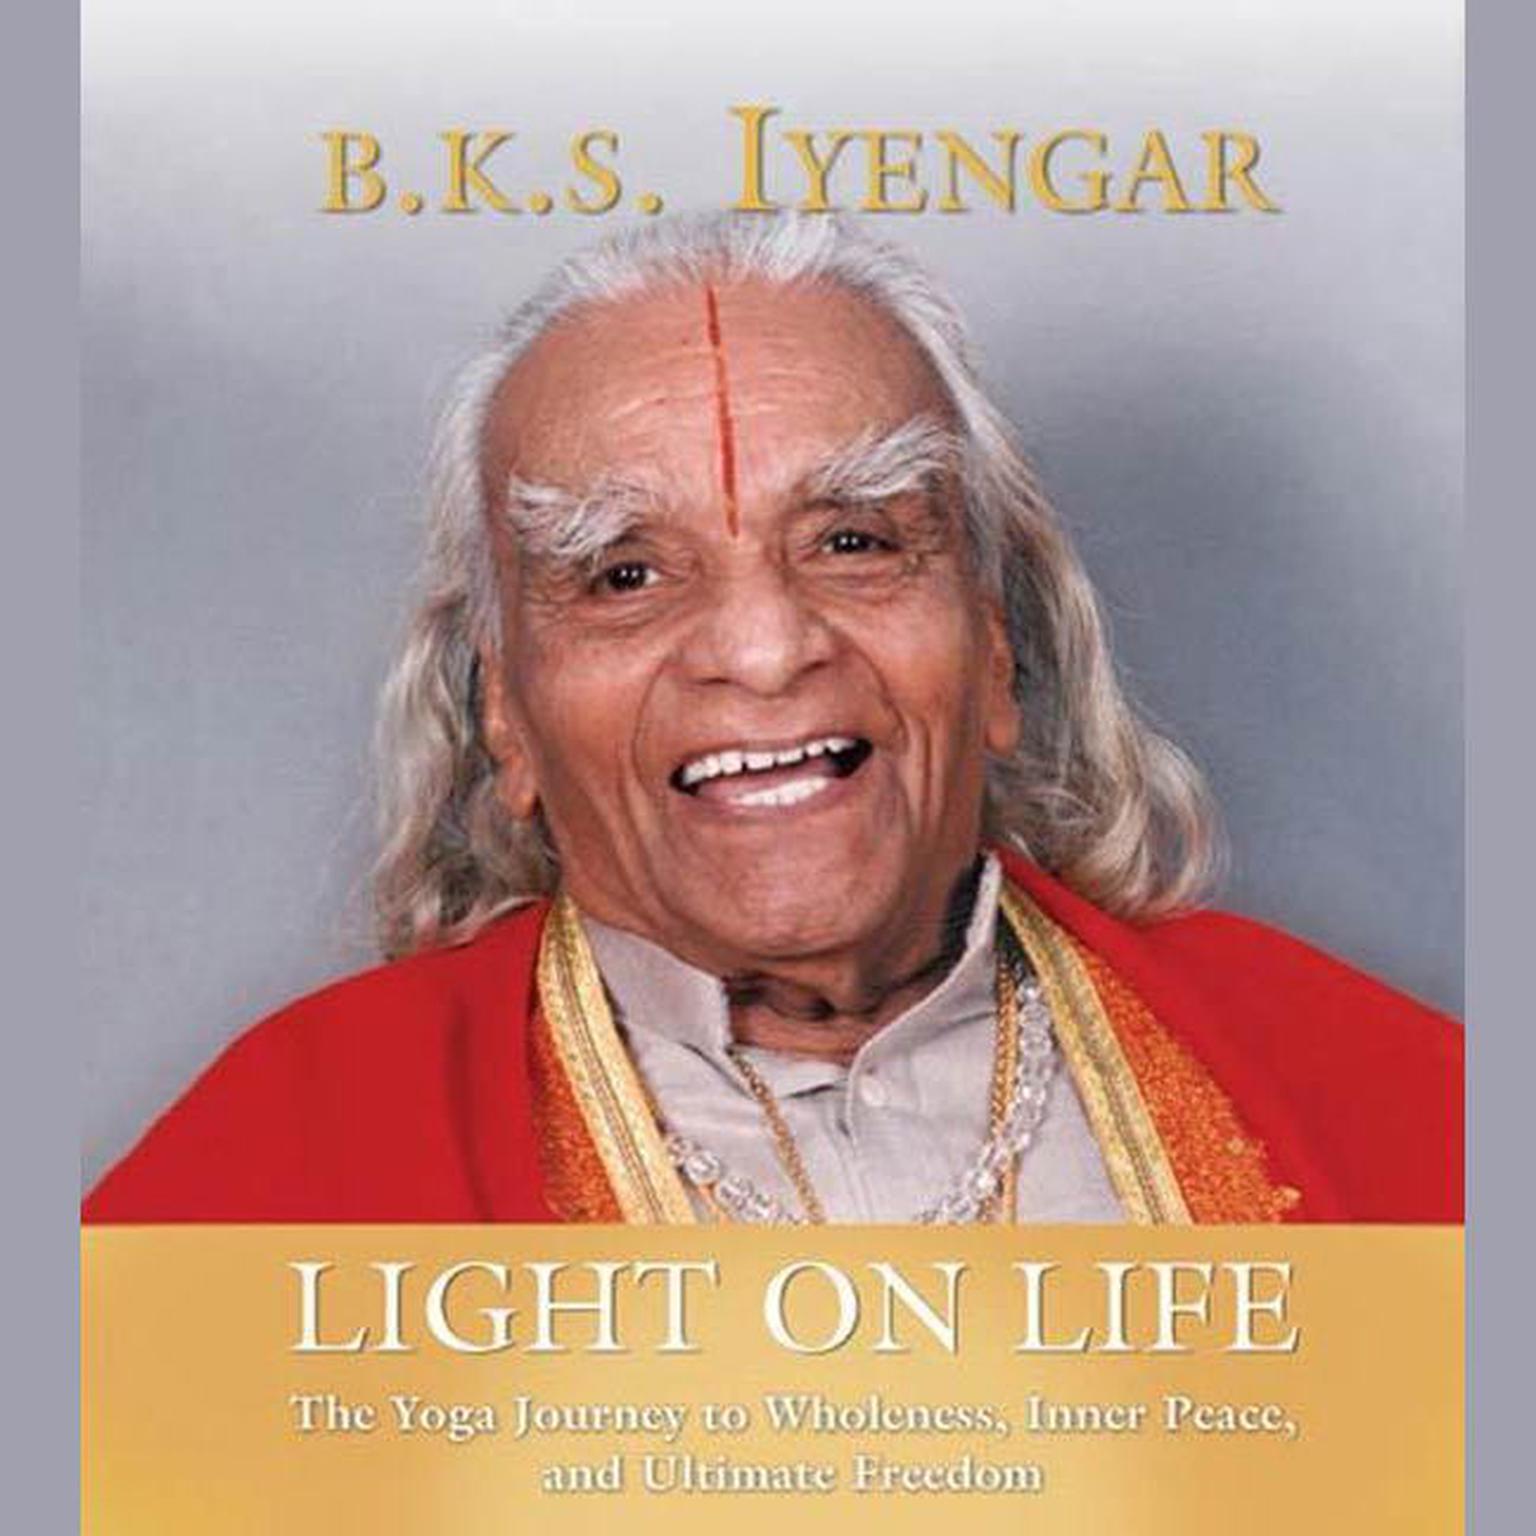 Light on Life (Abridged): The Yoga Way to Wholeness, Inner Peace, and Ultimate Freedom Audiobook, by B.K.S. Iyengar